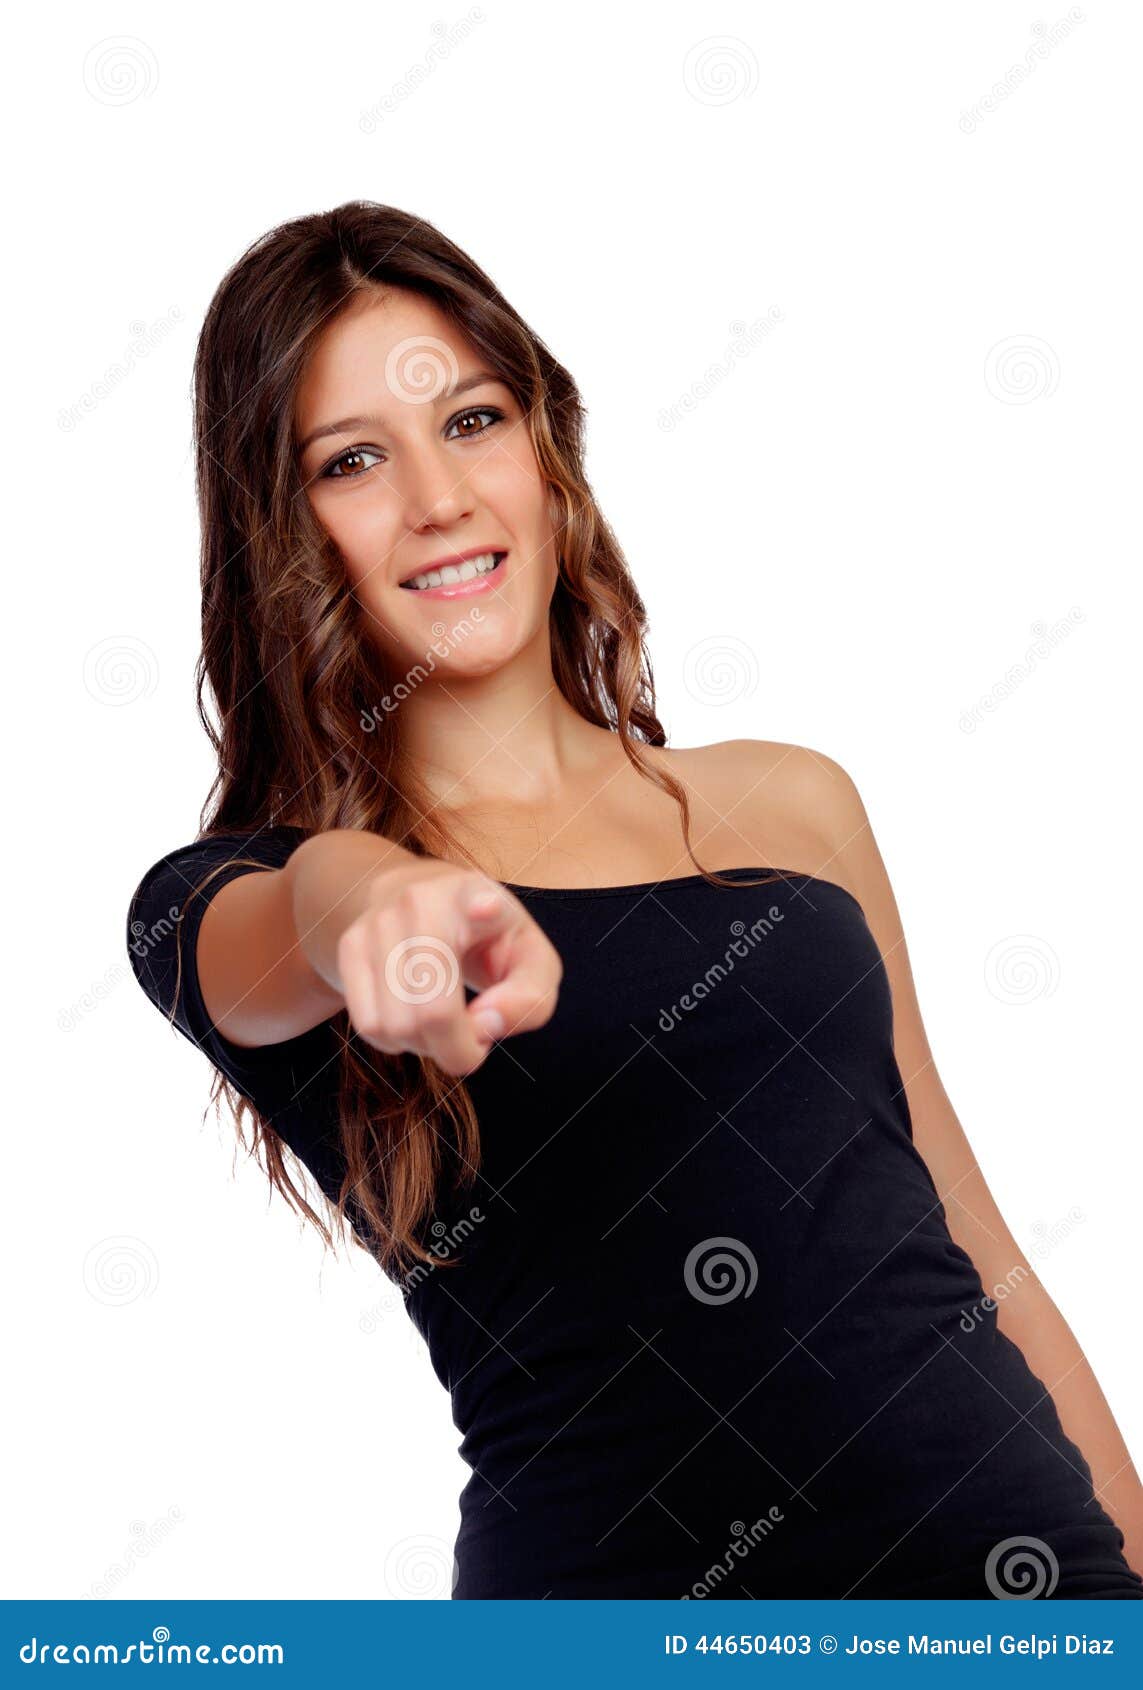 Attractive Casual Girl In Black Indicating At Camera Stock Image Image Of Adult Cheerful